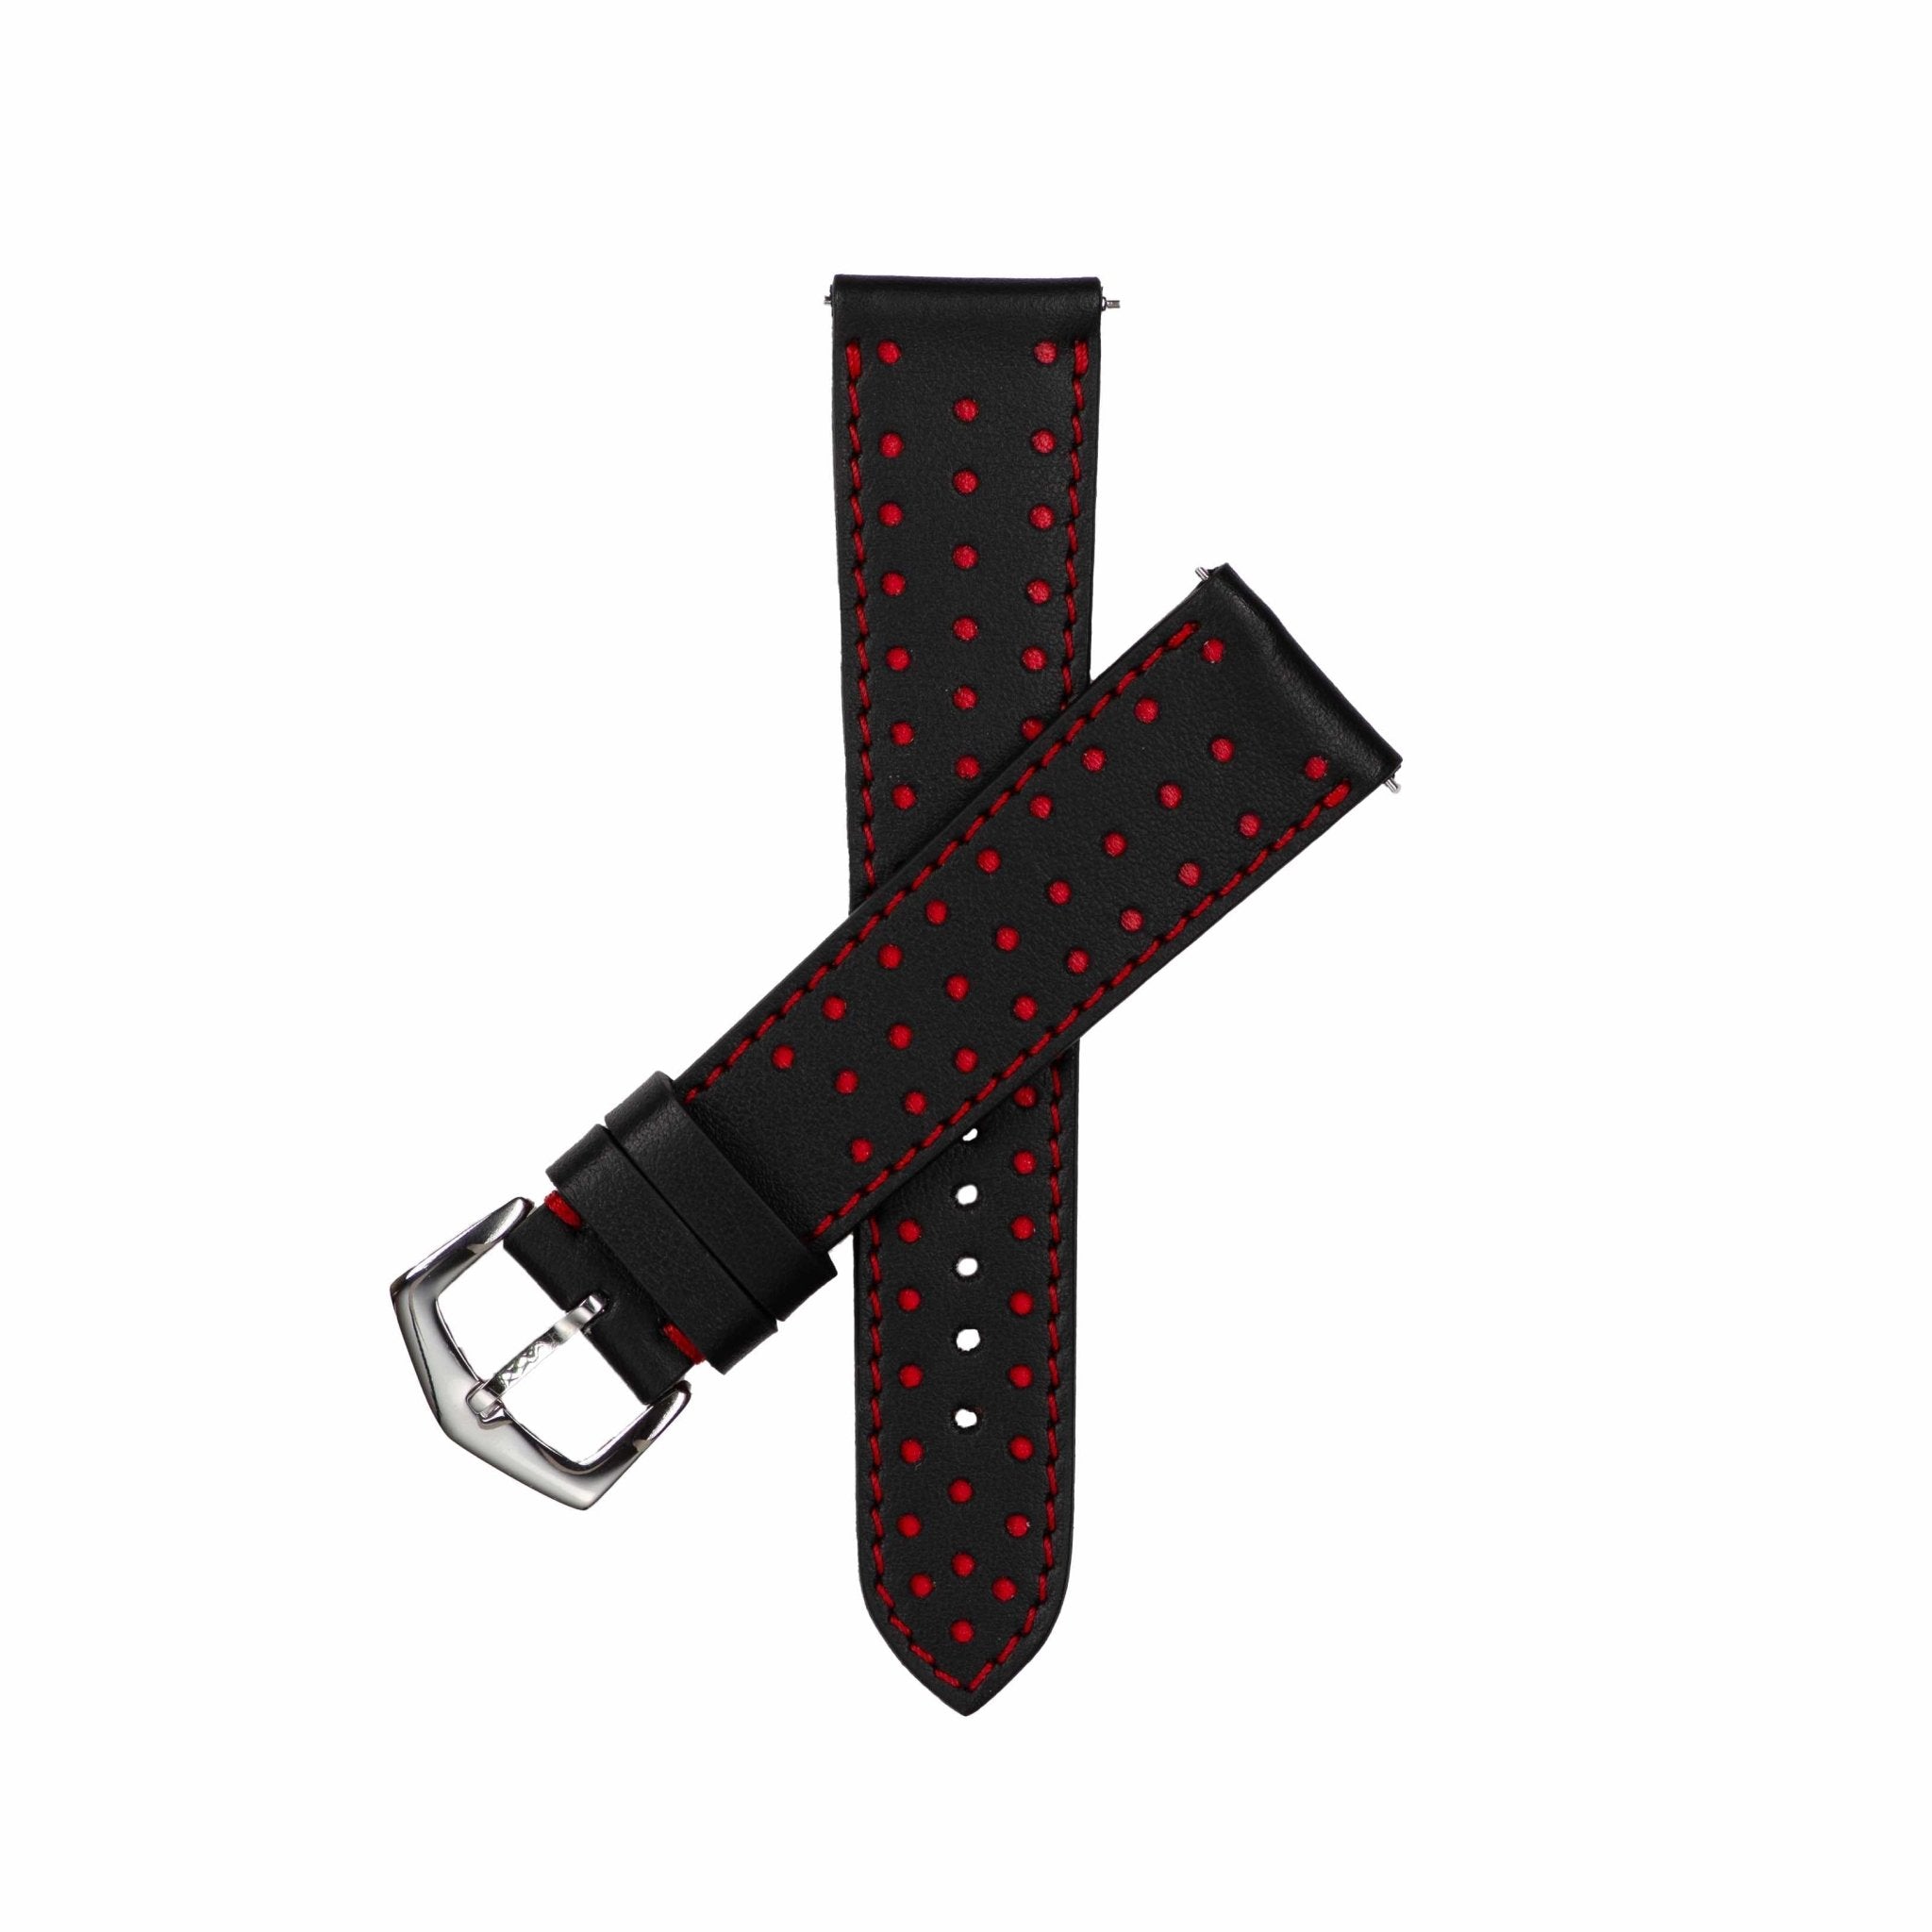 Black & Red "Driver" Leather Watch Strap - Milano Straps - #Watch Bands#